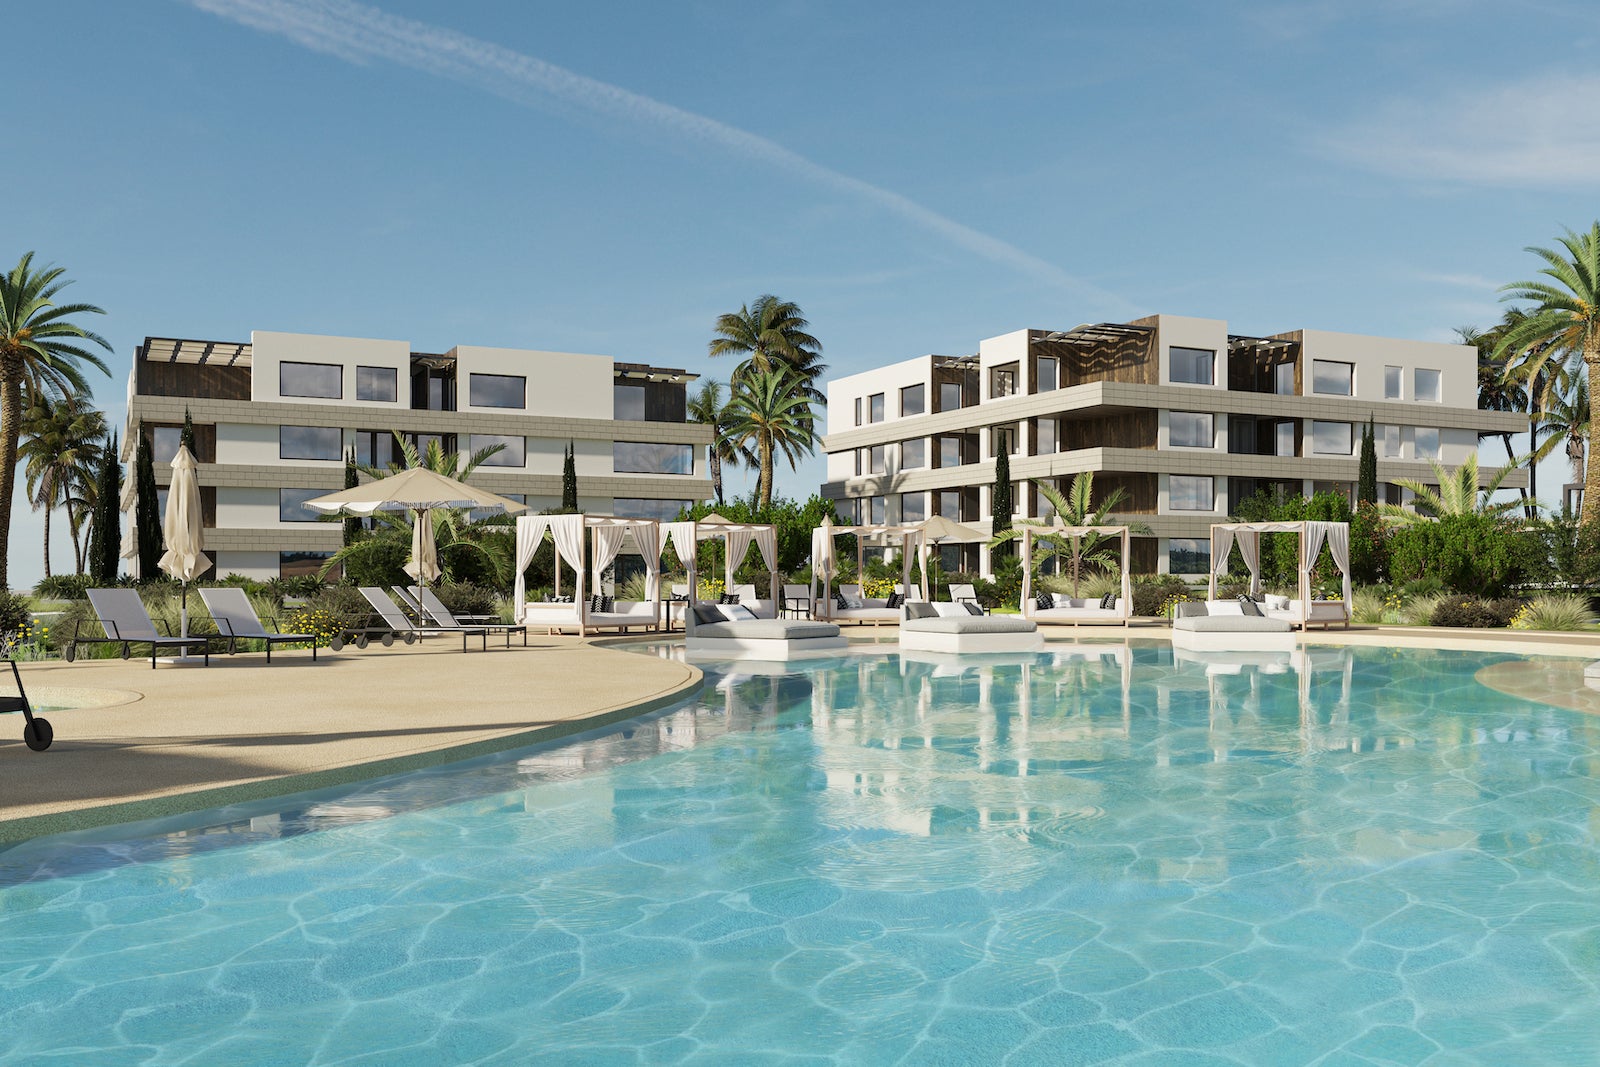 rendering of resort with pool and cabanas